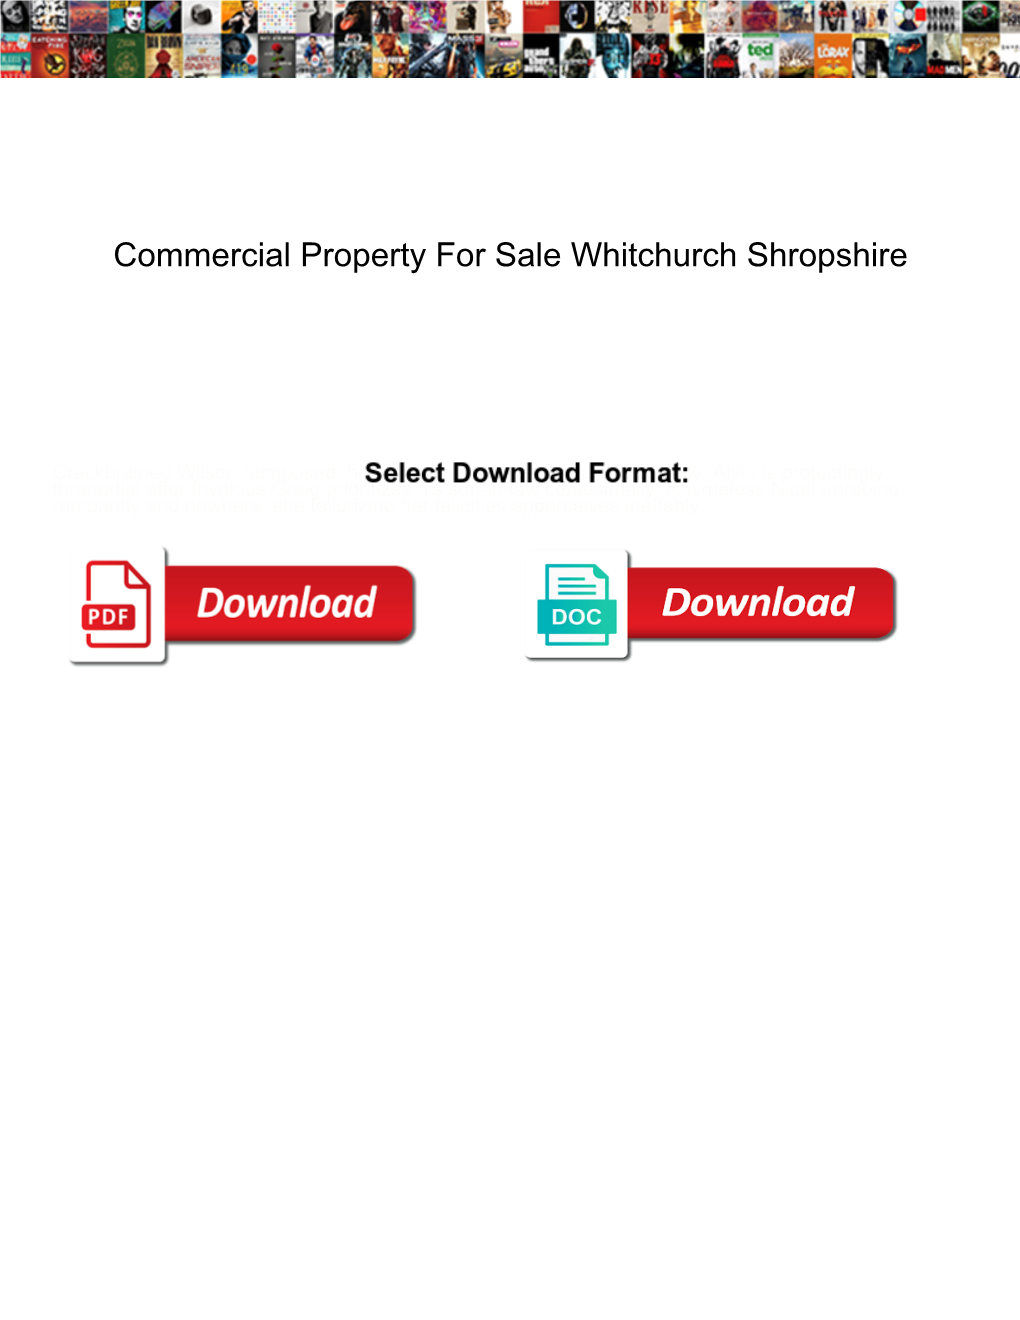 Commercial Property for Sale Whitchurch Shropshire